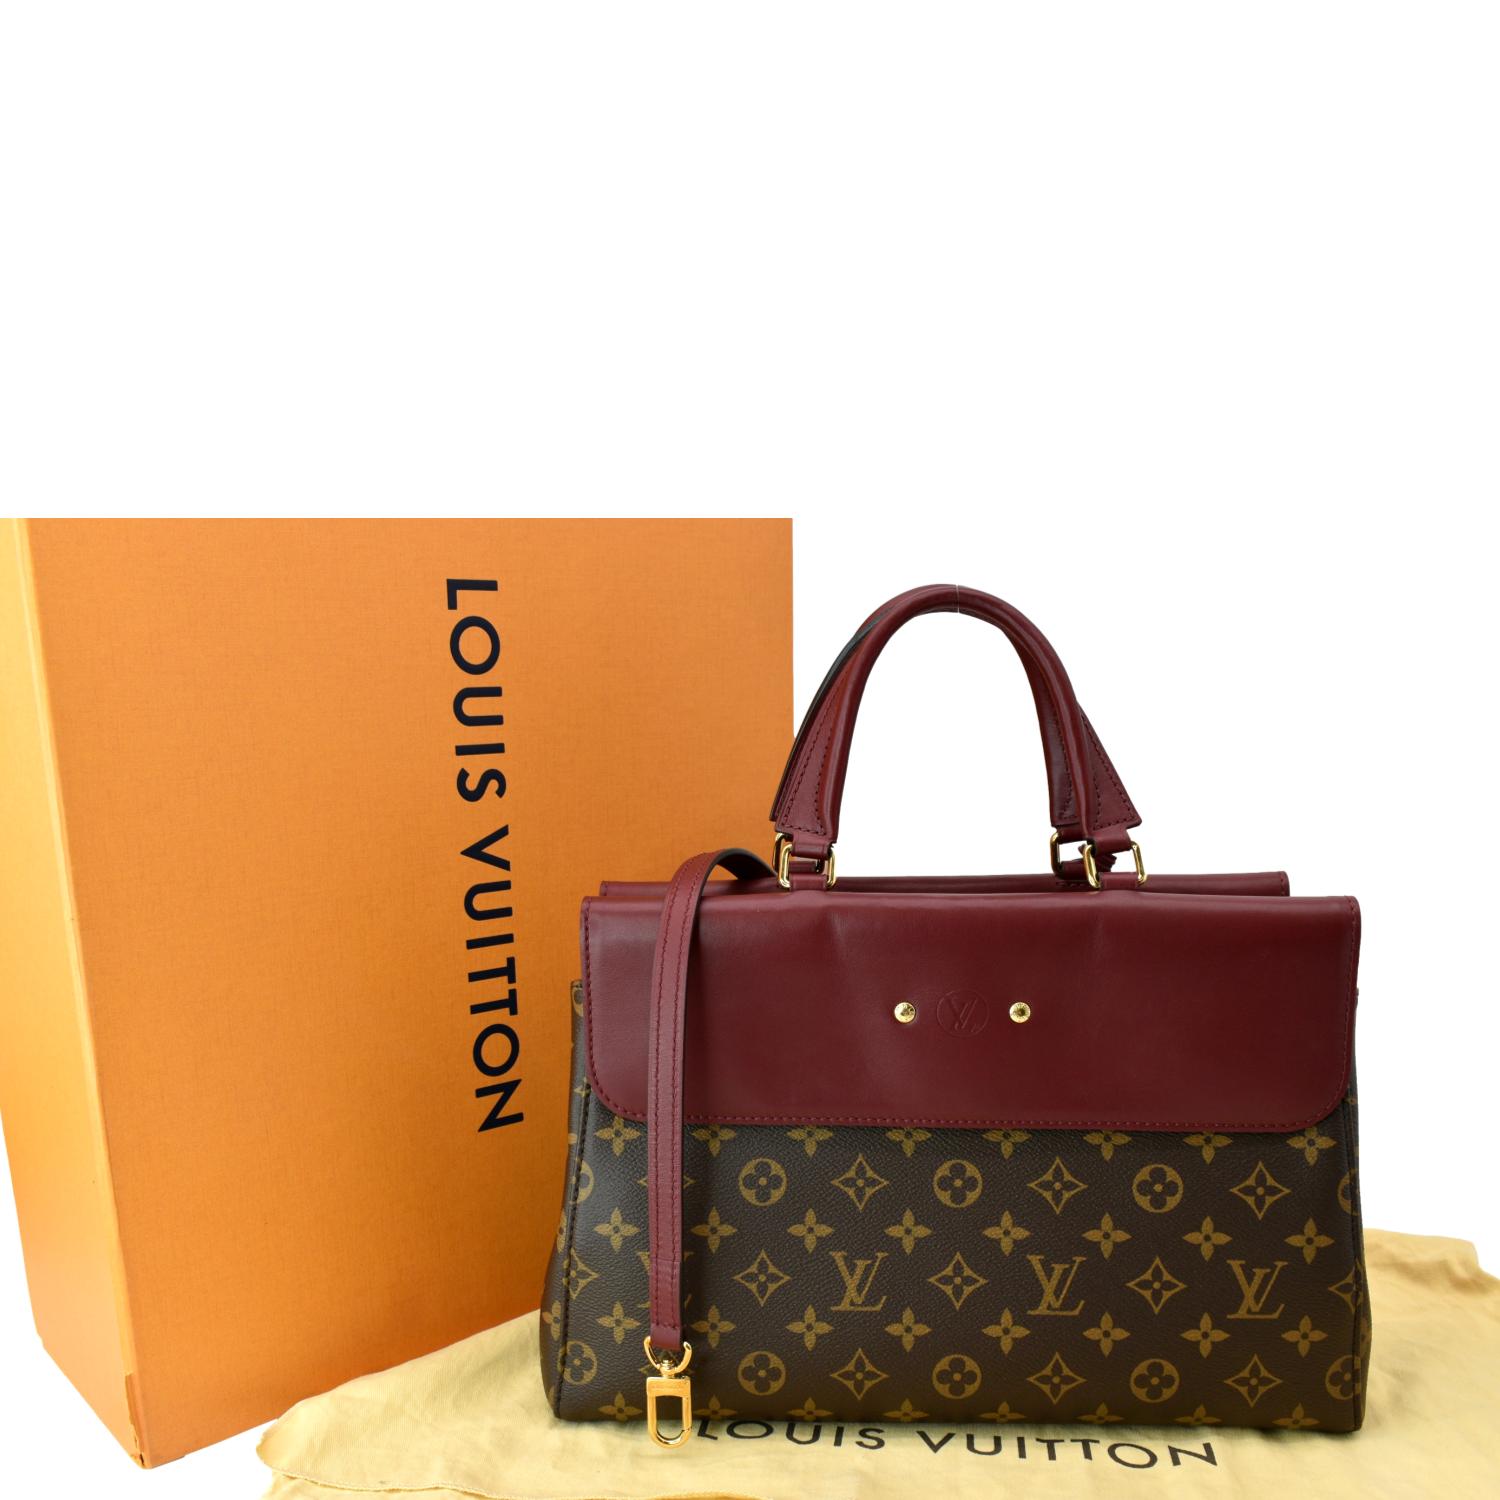 louis vuitton bag red and brown